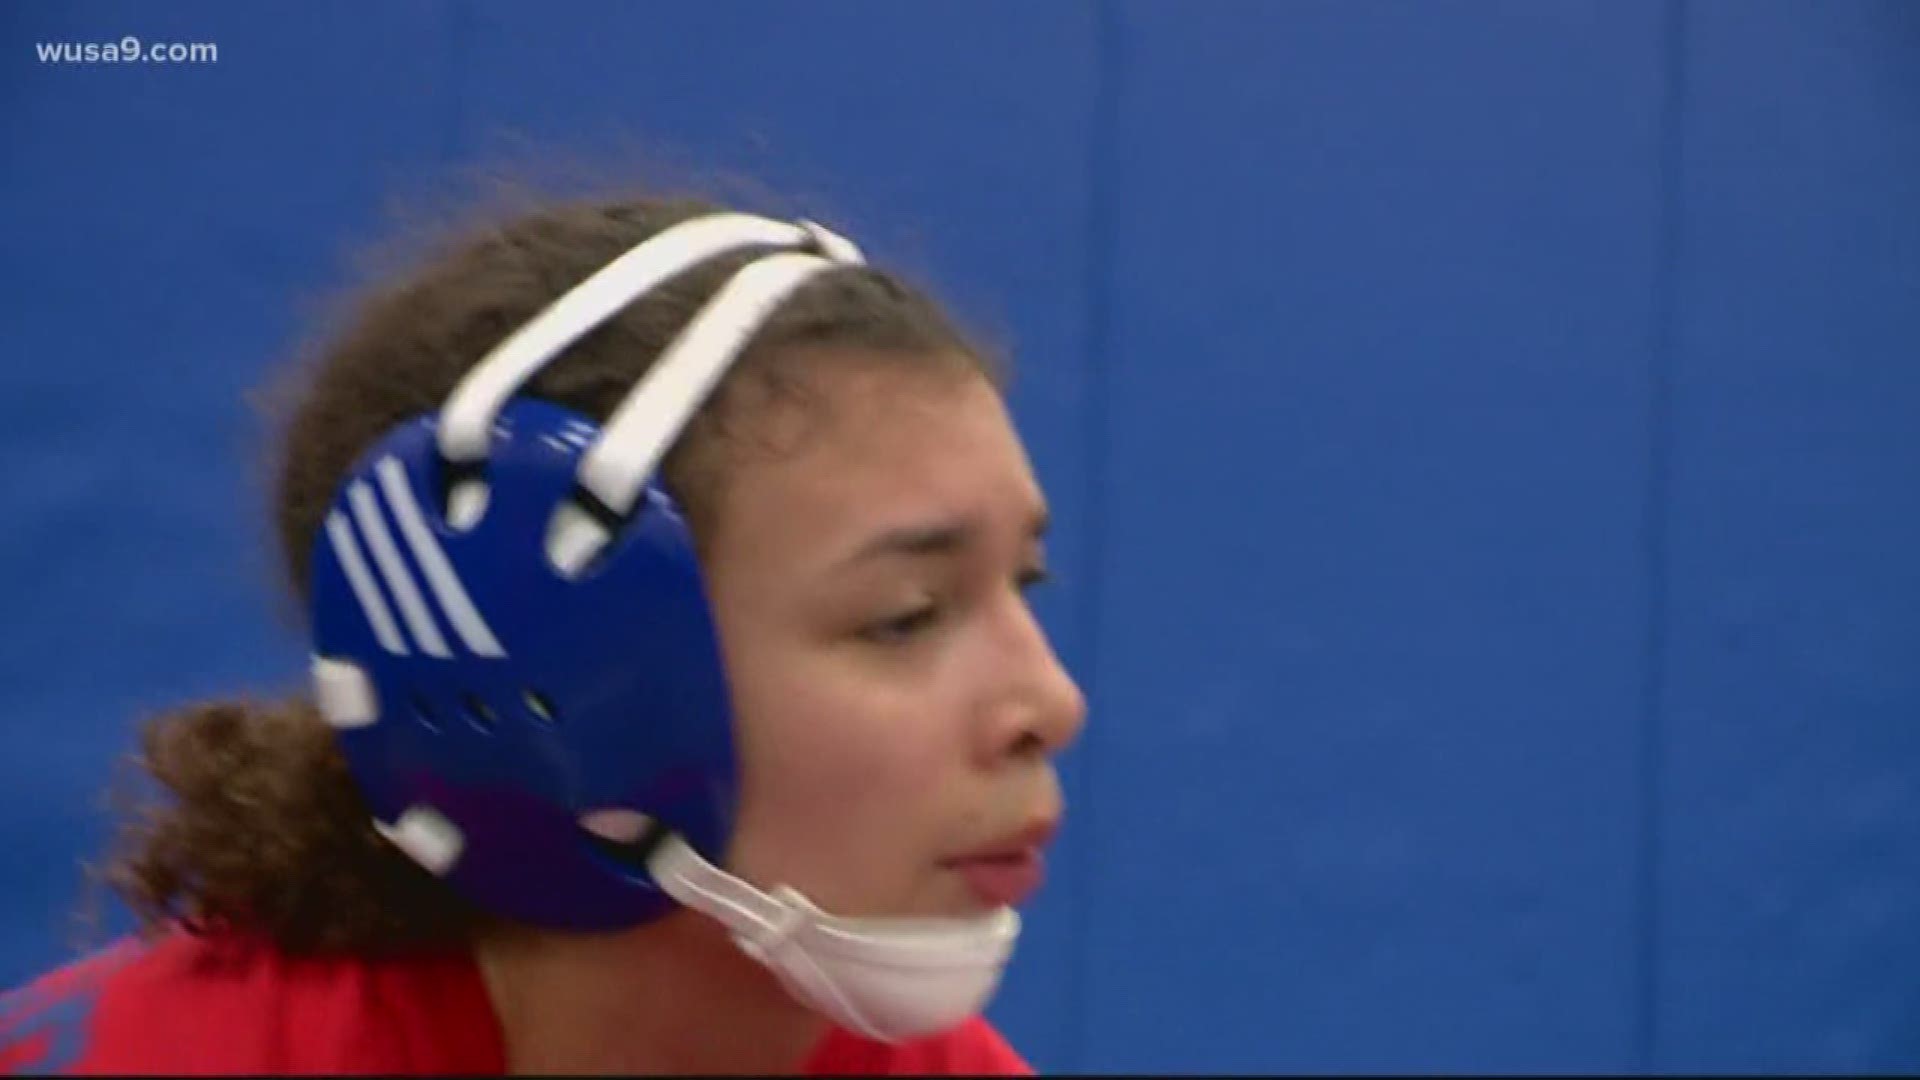 These girls wrestle.
But they're not in a girls-only division.
That means they're wrestling boys.
They want to know why there can't be a girls-only division